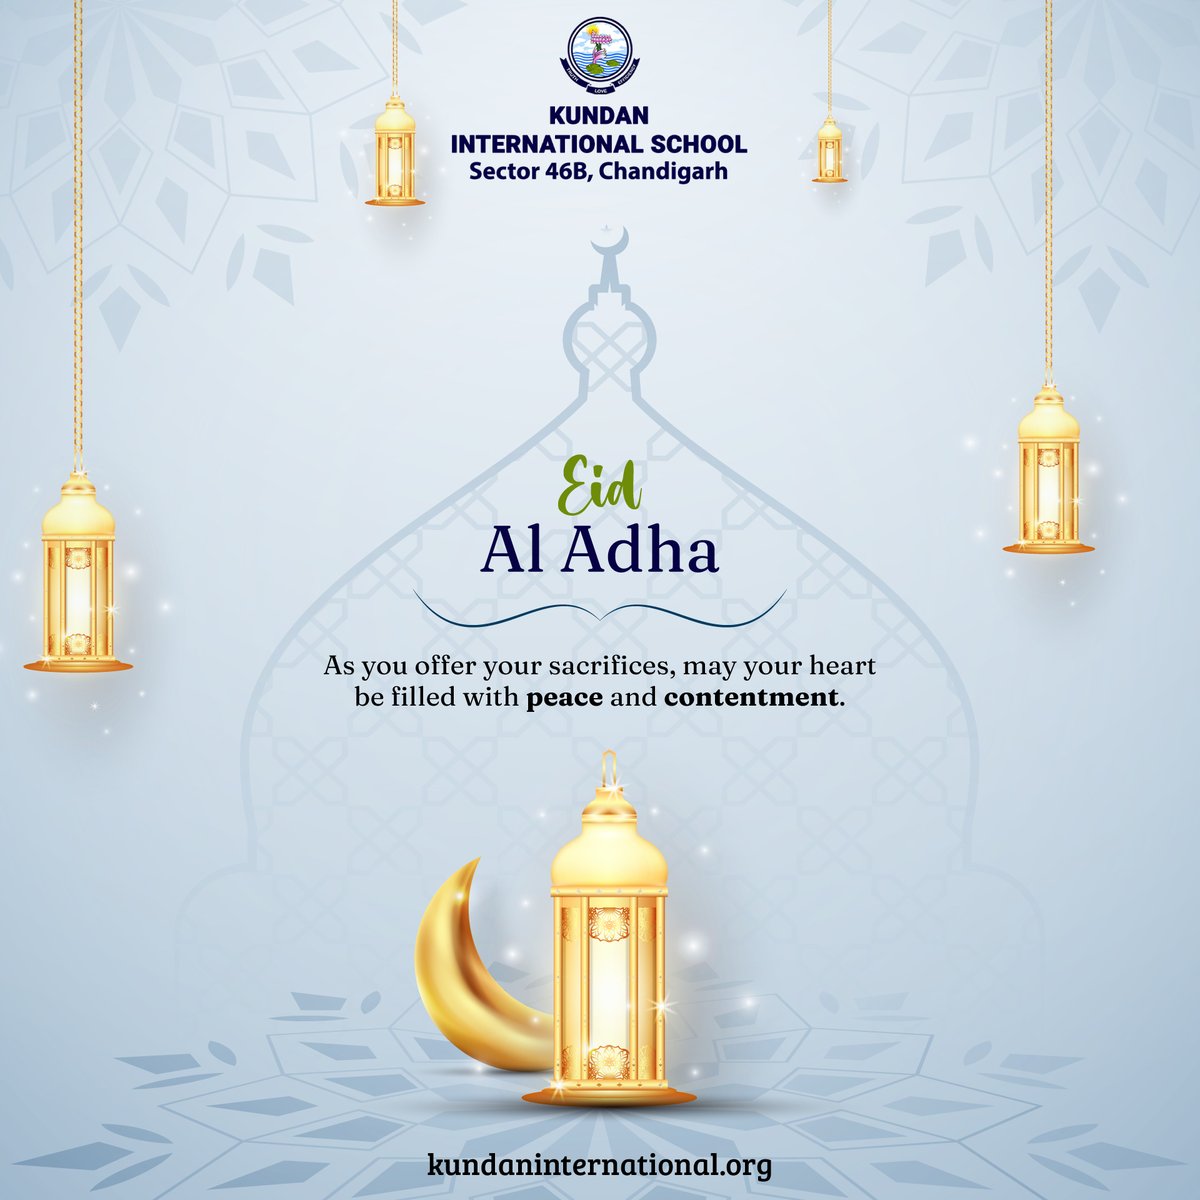 Eid-al-Adha🌙 is a time to reflect on our faith and renew our commitment to Allah. Wishing you and your family a blessed and peaceful celebration🕌

#EidMubarak #RenewalOfFaith #KundanInternationalSchool #SchoolInChandigarh #Education #SchoolSpirit #BlendedLearning #Curriculum